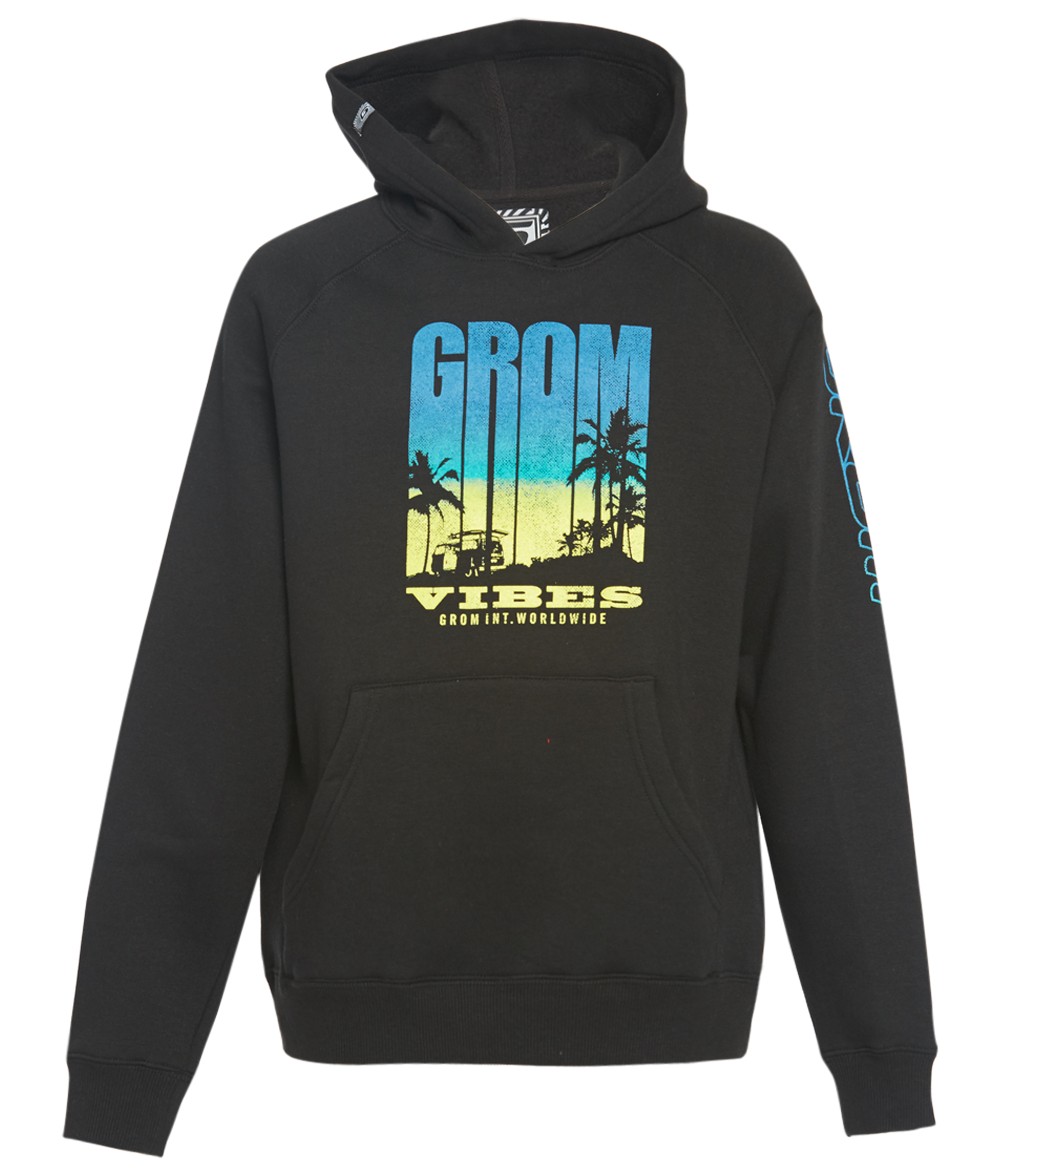 Grom Boys' Vibes Pullover Hoodie Big Kid - Black Xl 14/16 Cotton/Polyester - Swimoutlet.com